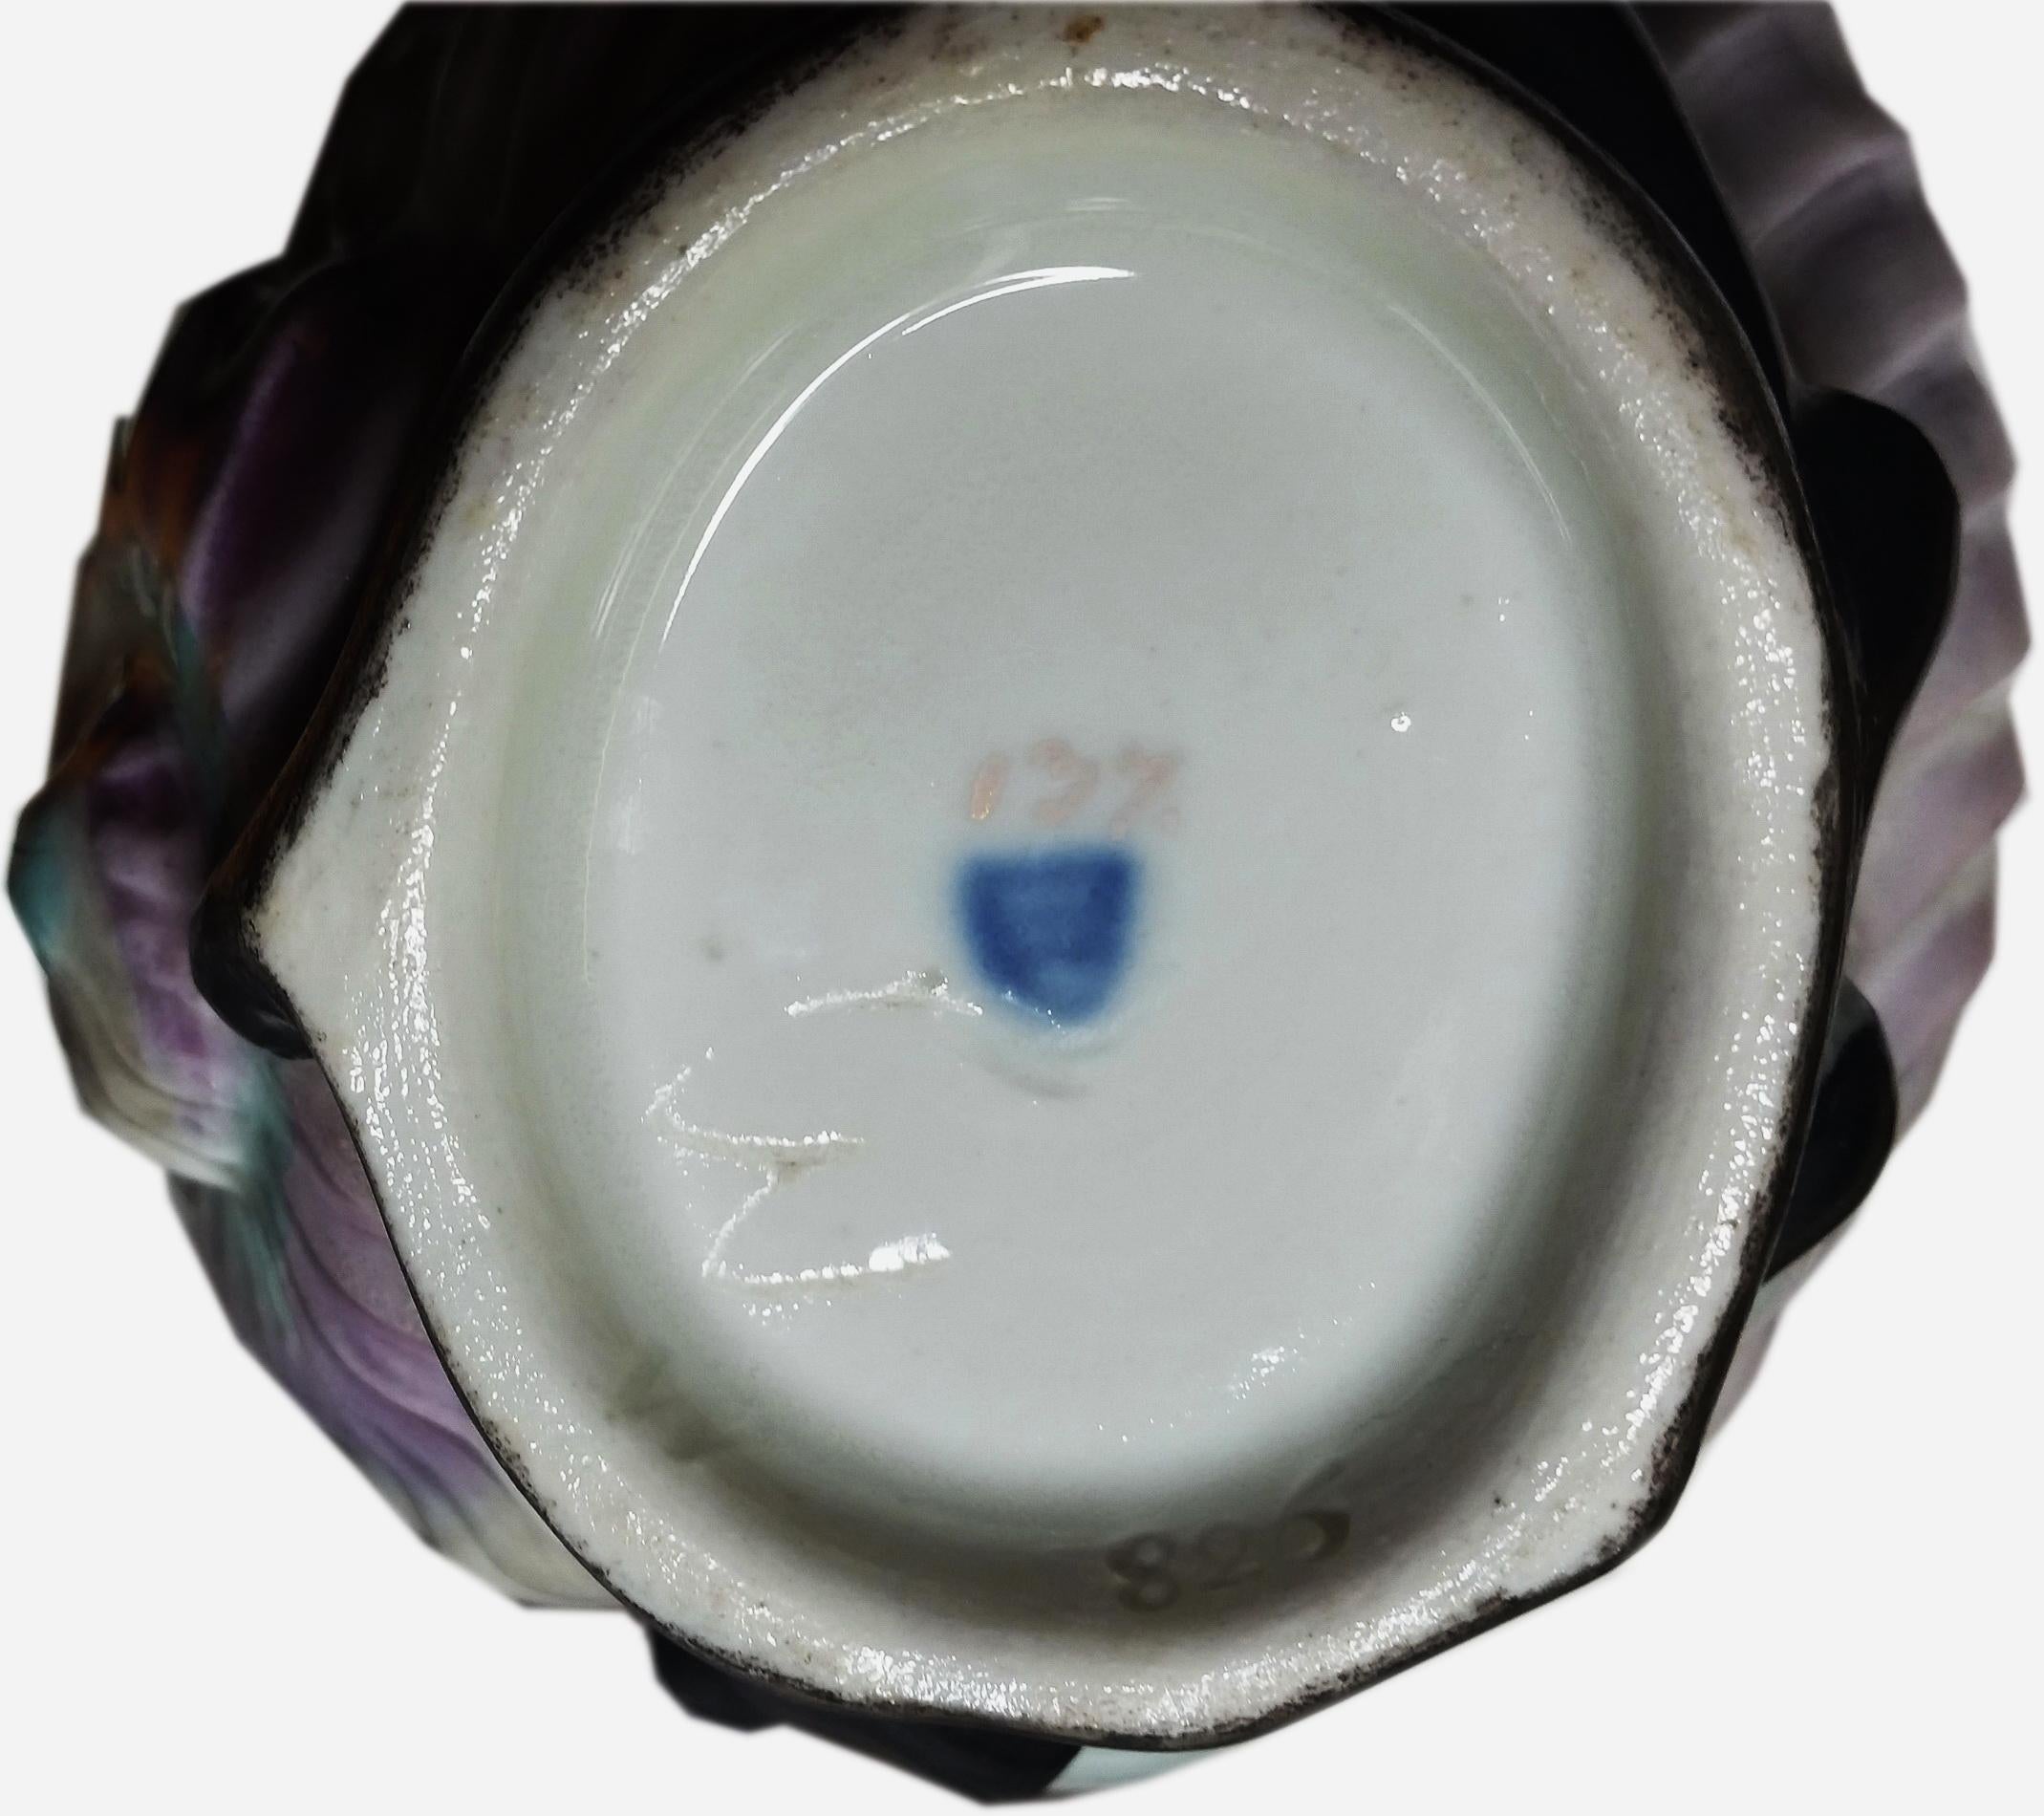 Vienna Imperial Porcelain Cup Saucer Shaped as Snail and Round Clam, 1826 3